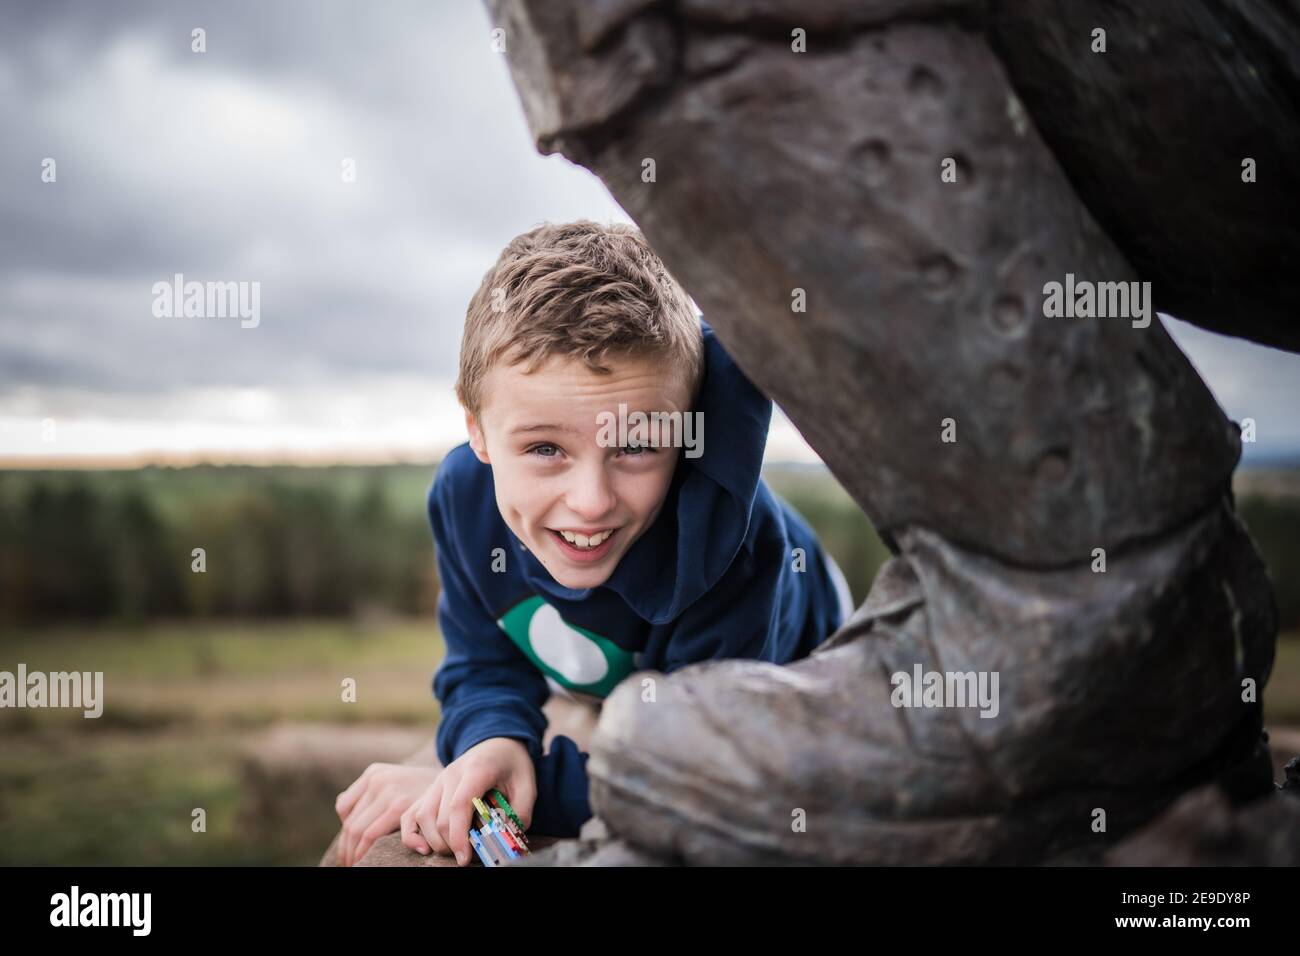 Happy smiling laughing young boy exploring outdoors forest wearing blue hooded top behind giant foot of bronze statue Stock Photo